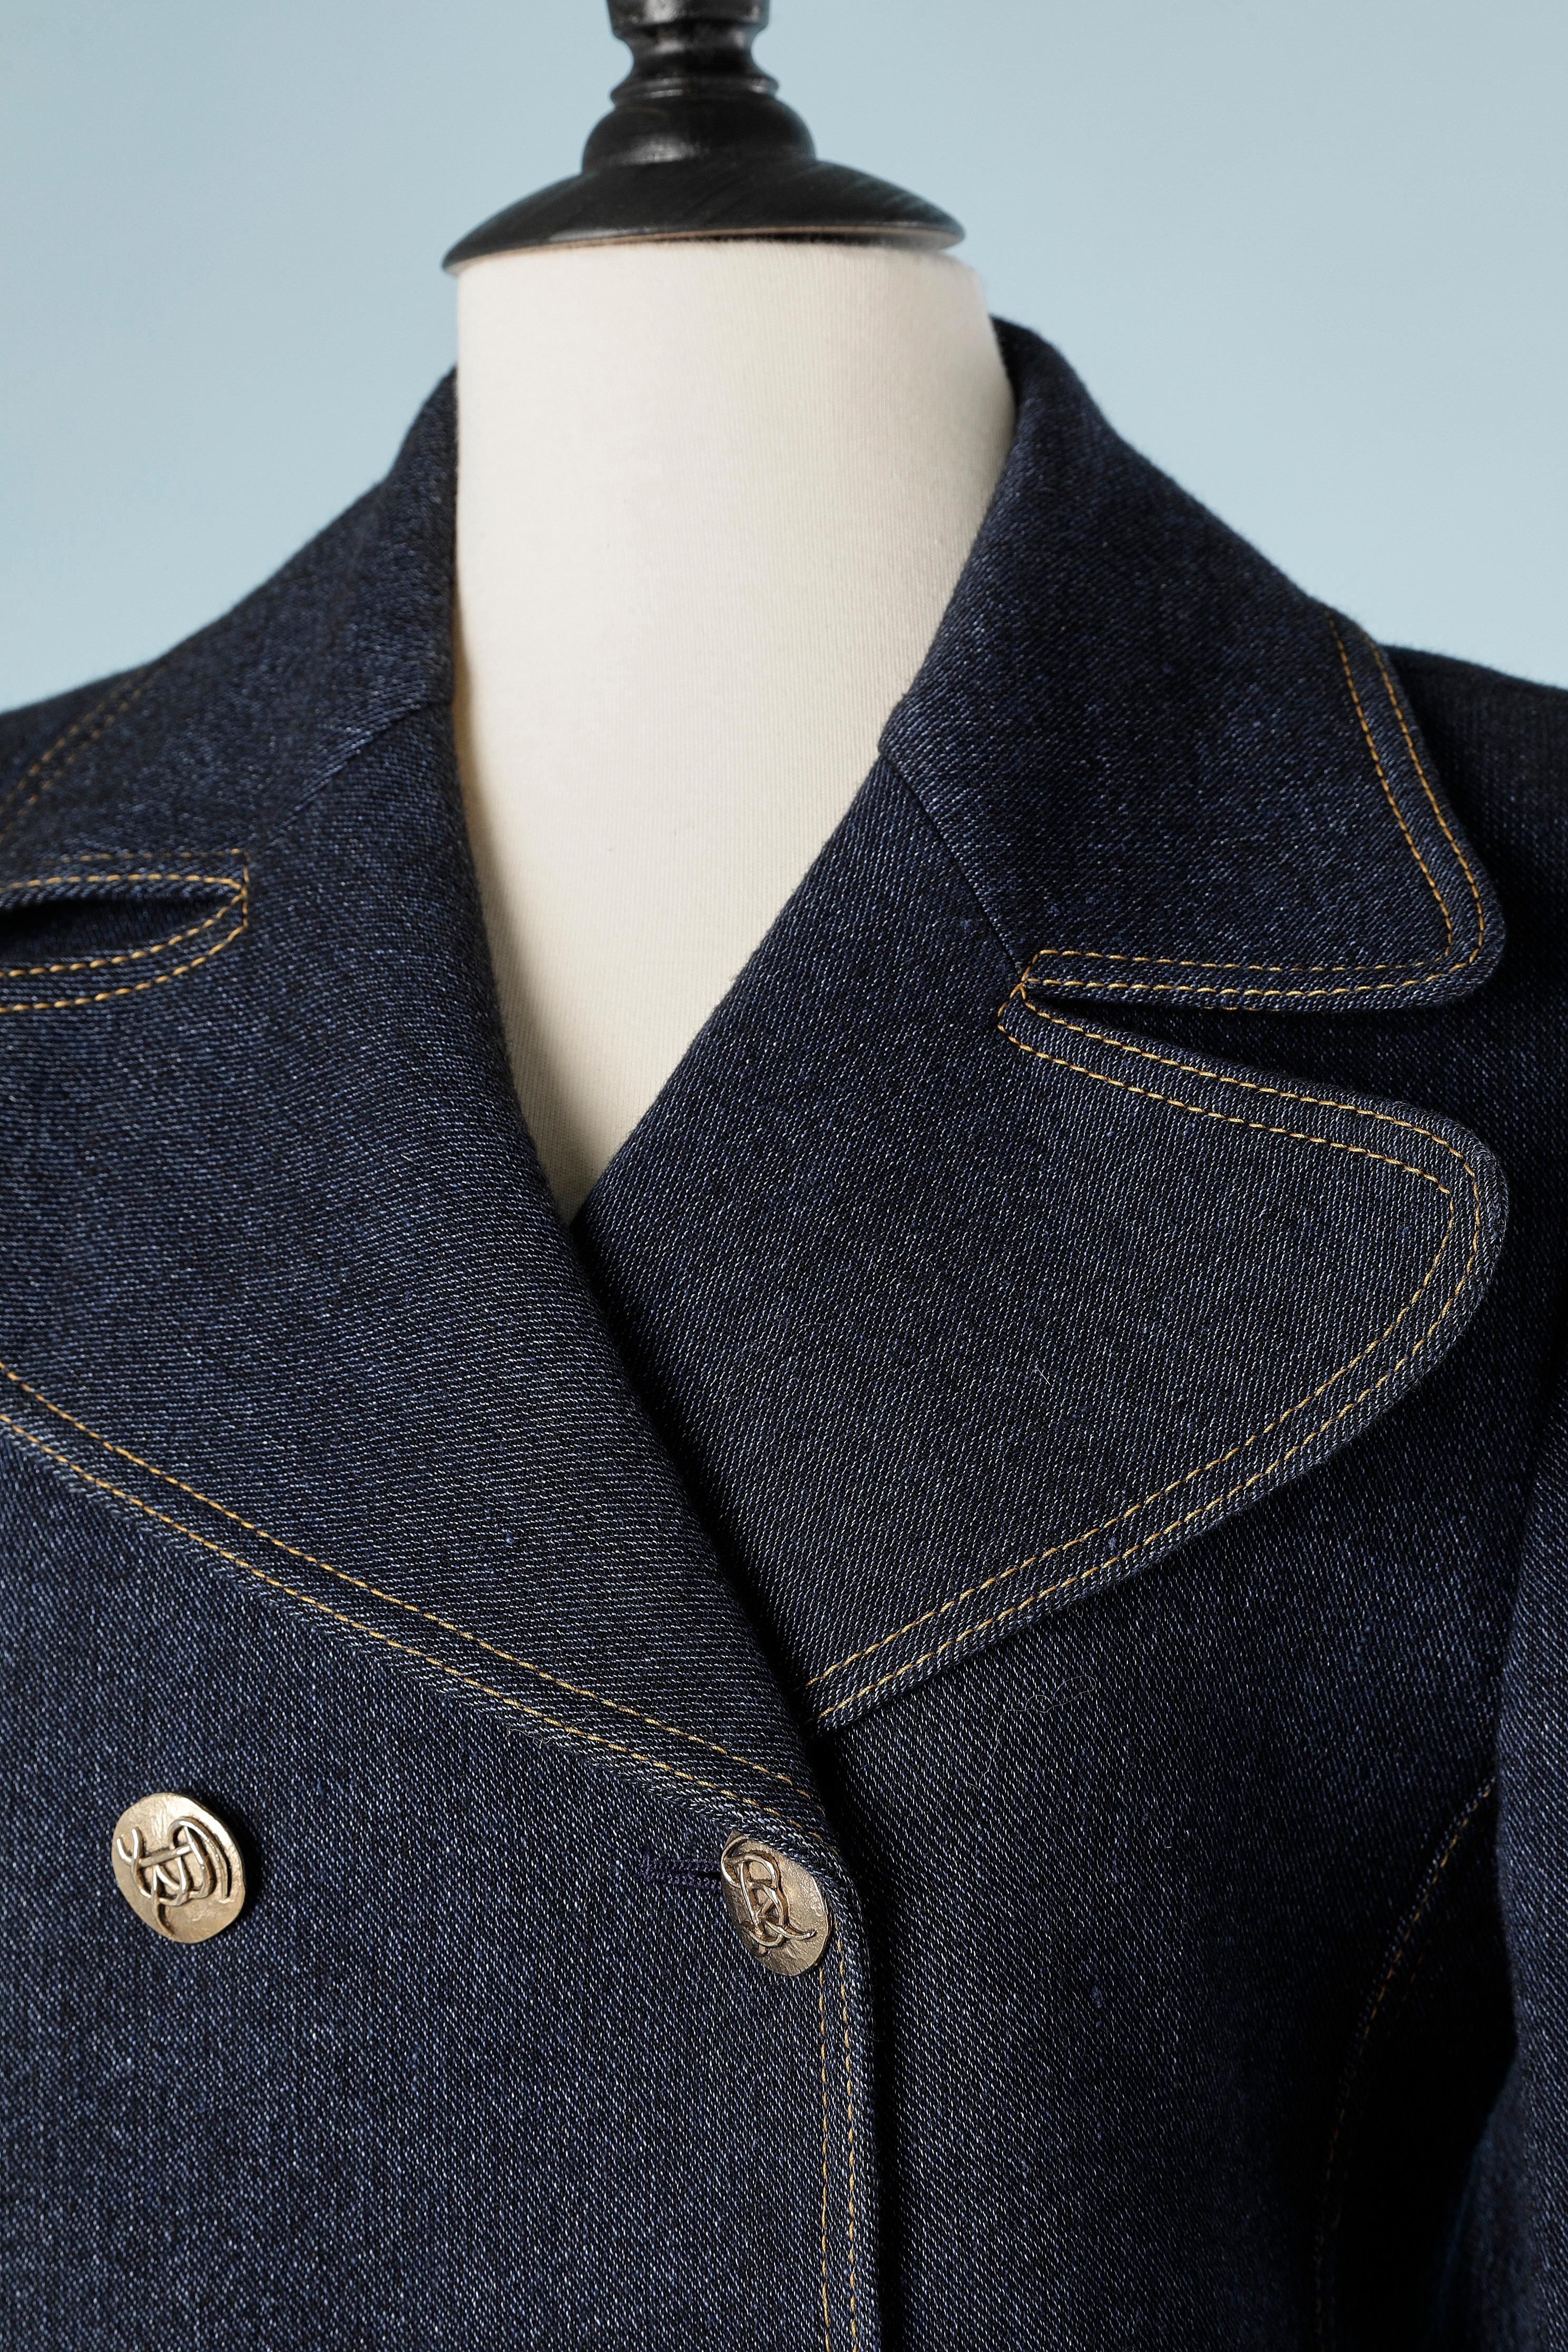 Double-breasted coat in wool like denim aspect and gold metal branded buttons.
Coat fabric: wool, linen , cotton. Lining : 100% rayon 
SIZE 38 / M 